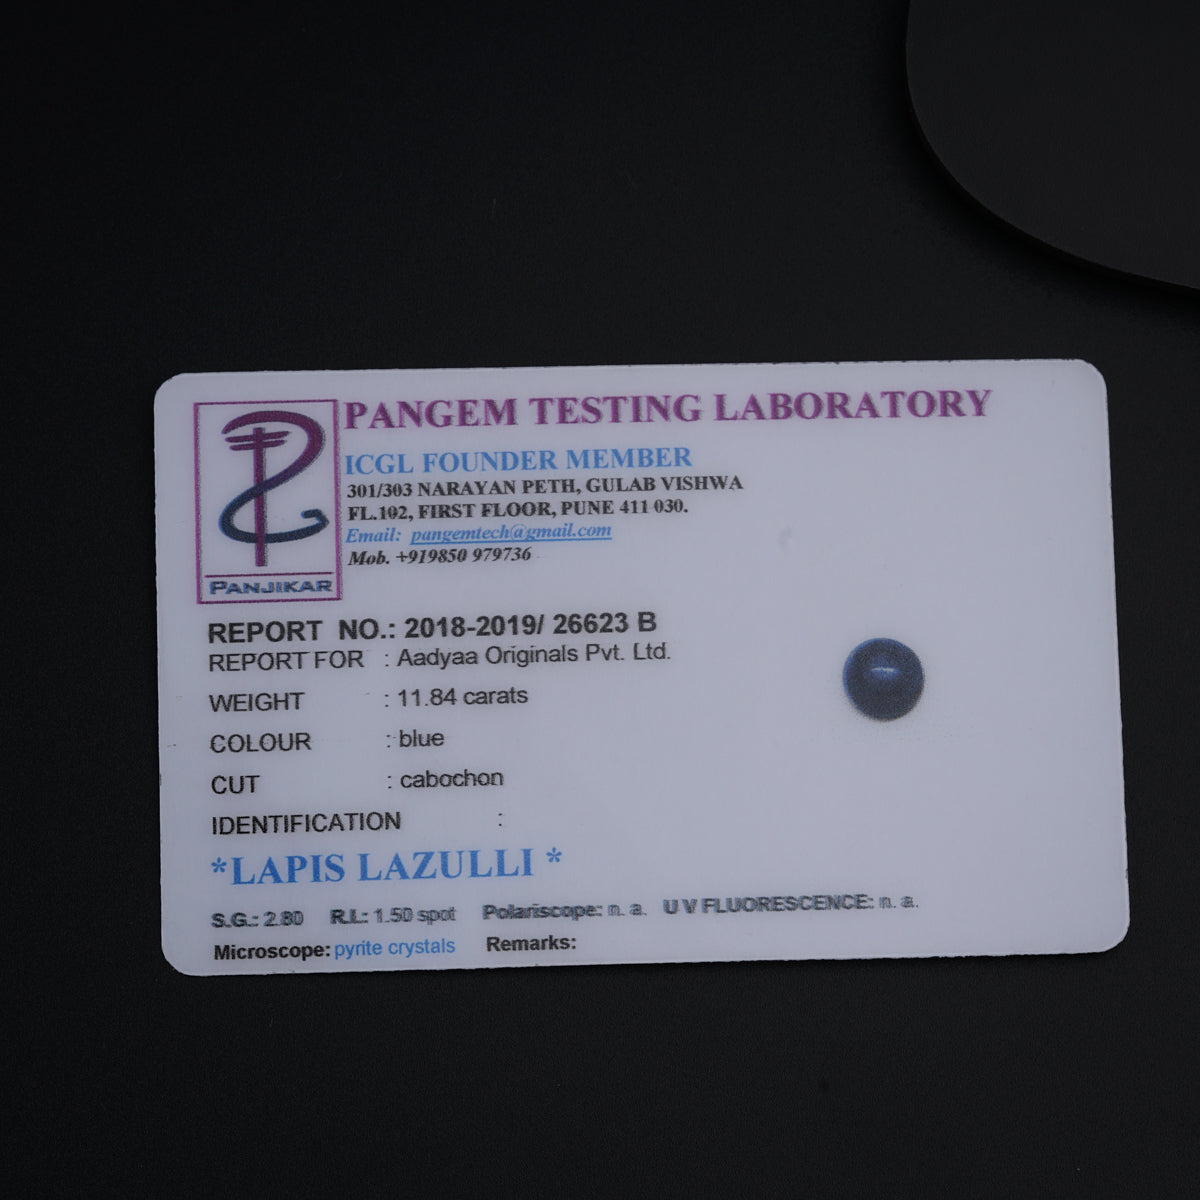 a tag on a table that says pangm testing laboratory